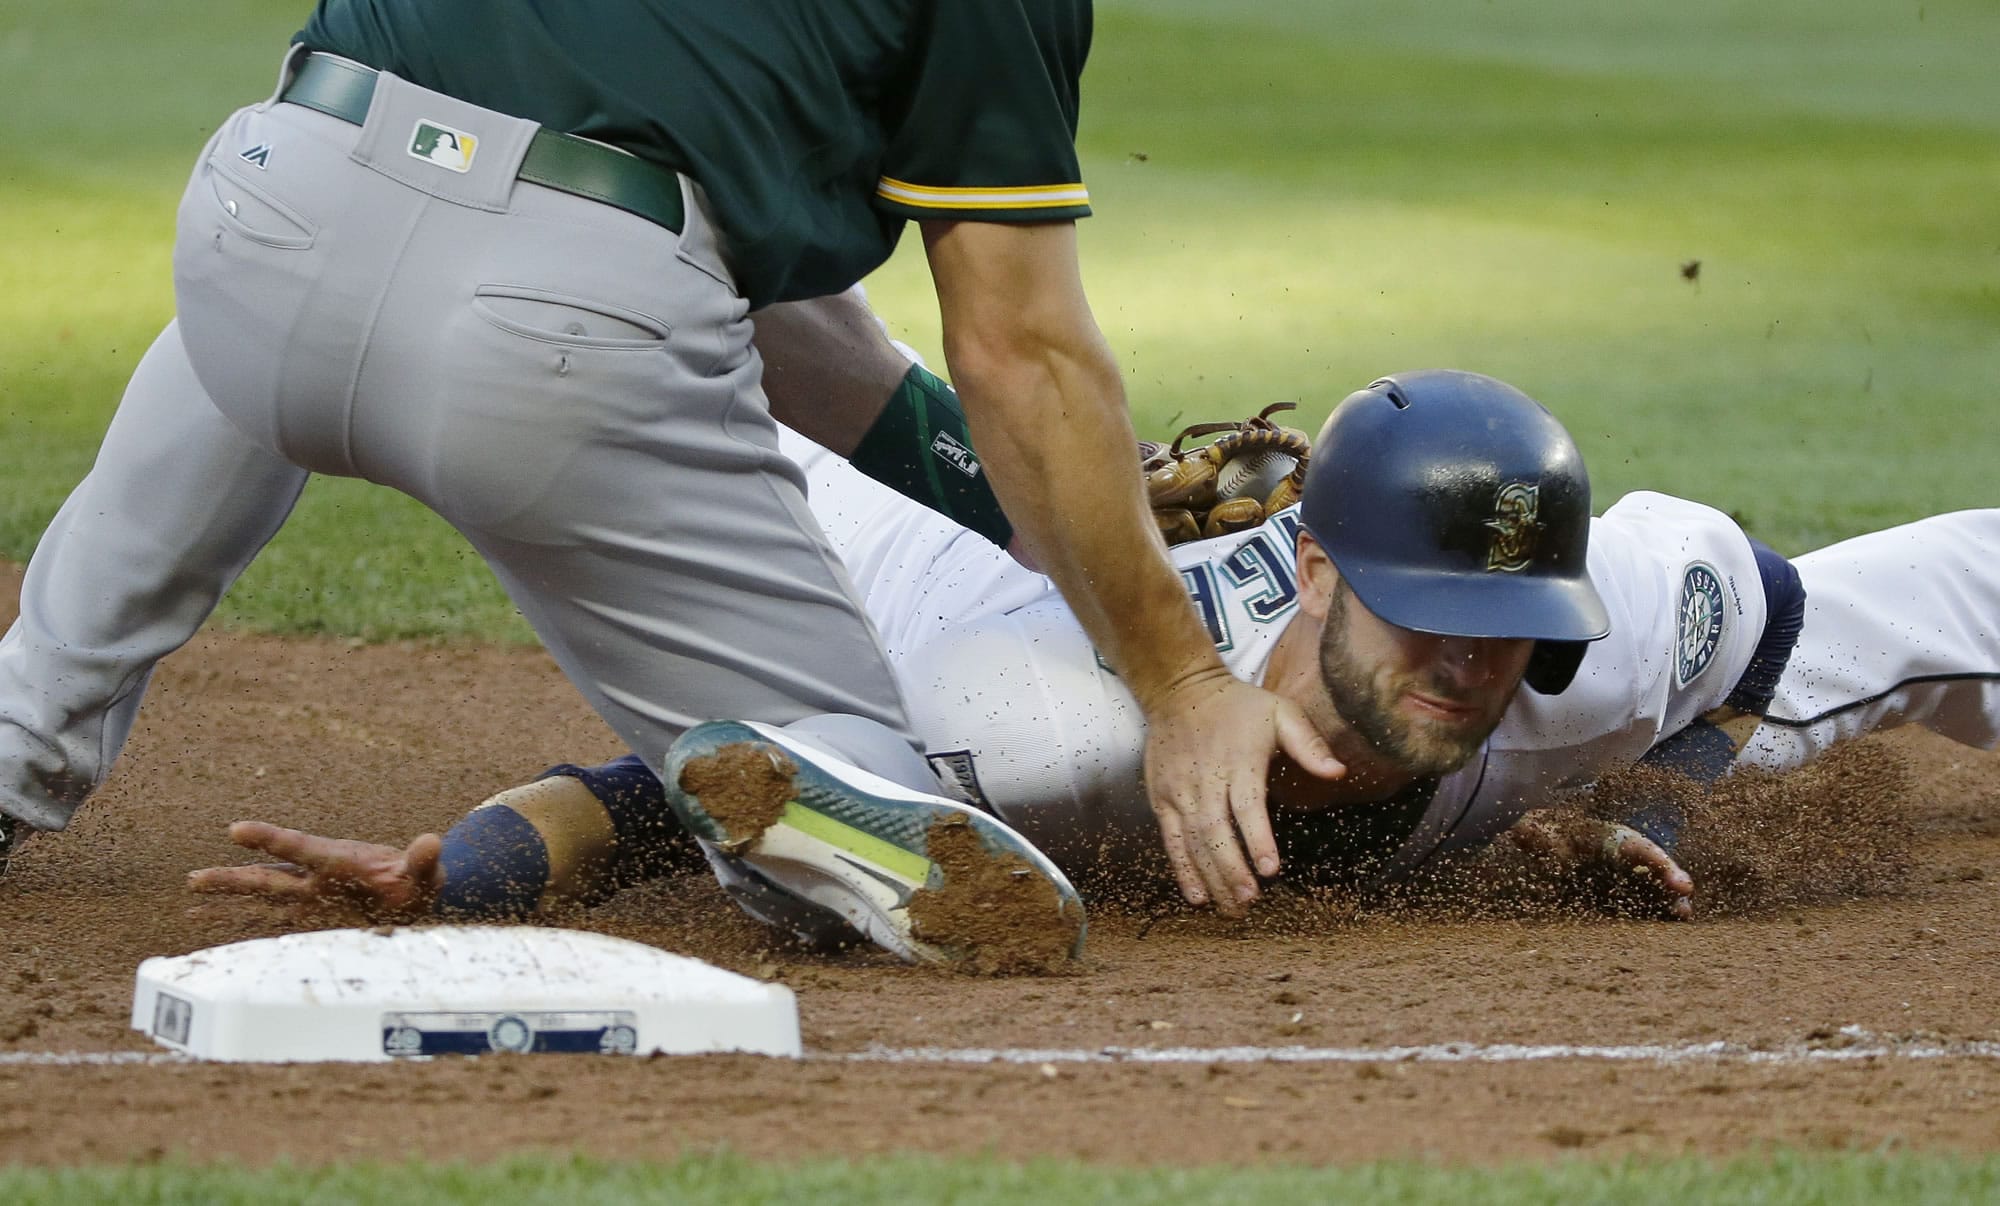 Seattle Mariners' Mitch Haniger, right, is tagged out at third base by Oakland Athletics third baseman Matt Chapman during the third inning of a baseball game, Thursday, July 6, 2017, in Seattle. Haniger was trying to advance after a fly ball hit by Jarrod Dyson was caught by Oakland Athletics center fielder Jaycob Brugman. (AP Photo/Ted S.